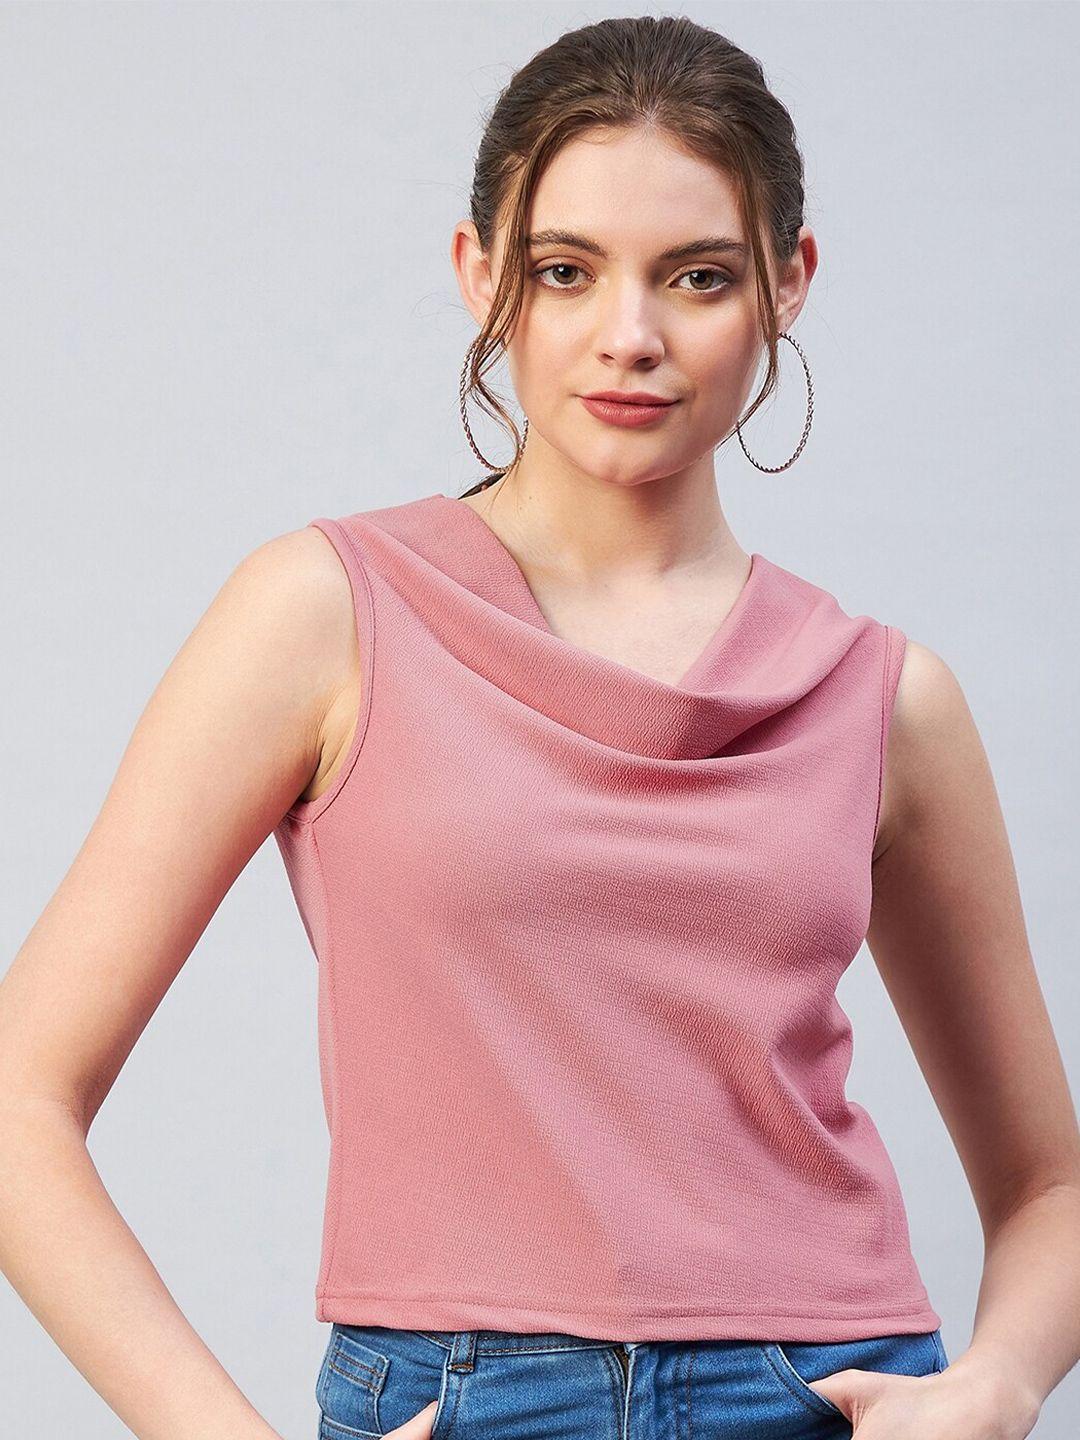 carlton london pink solid cowl neck top